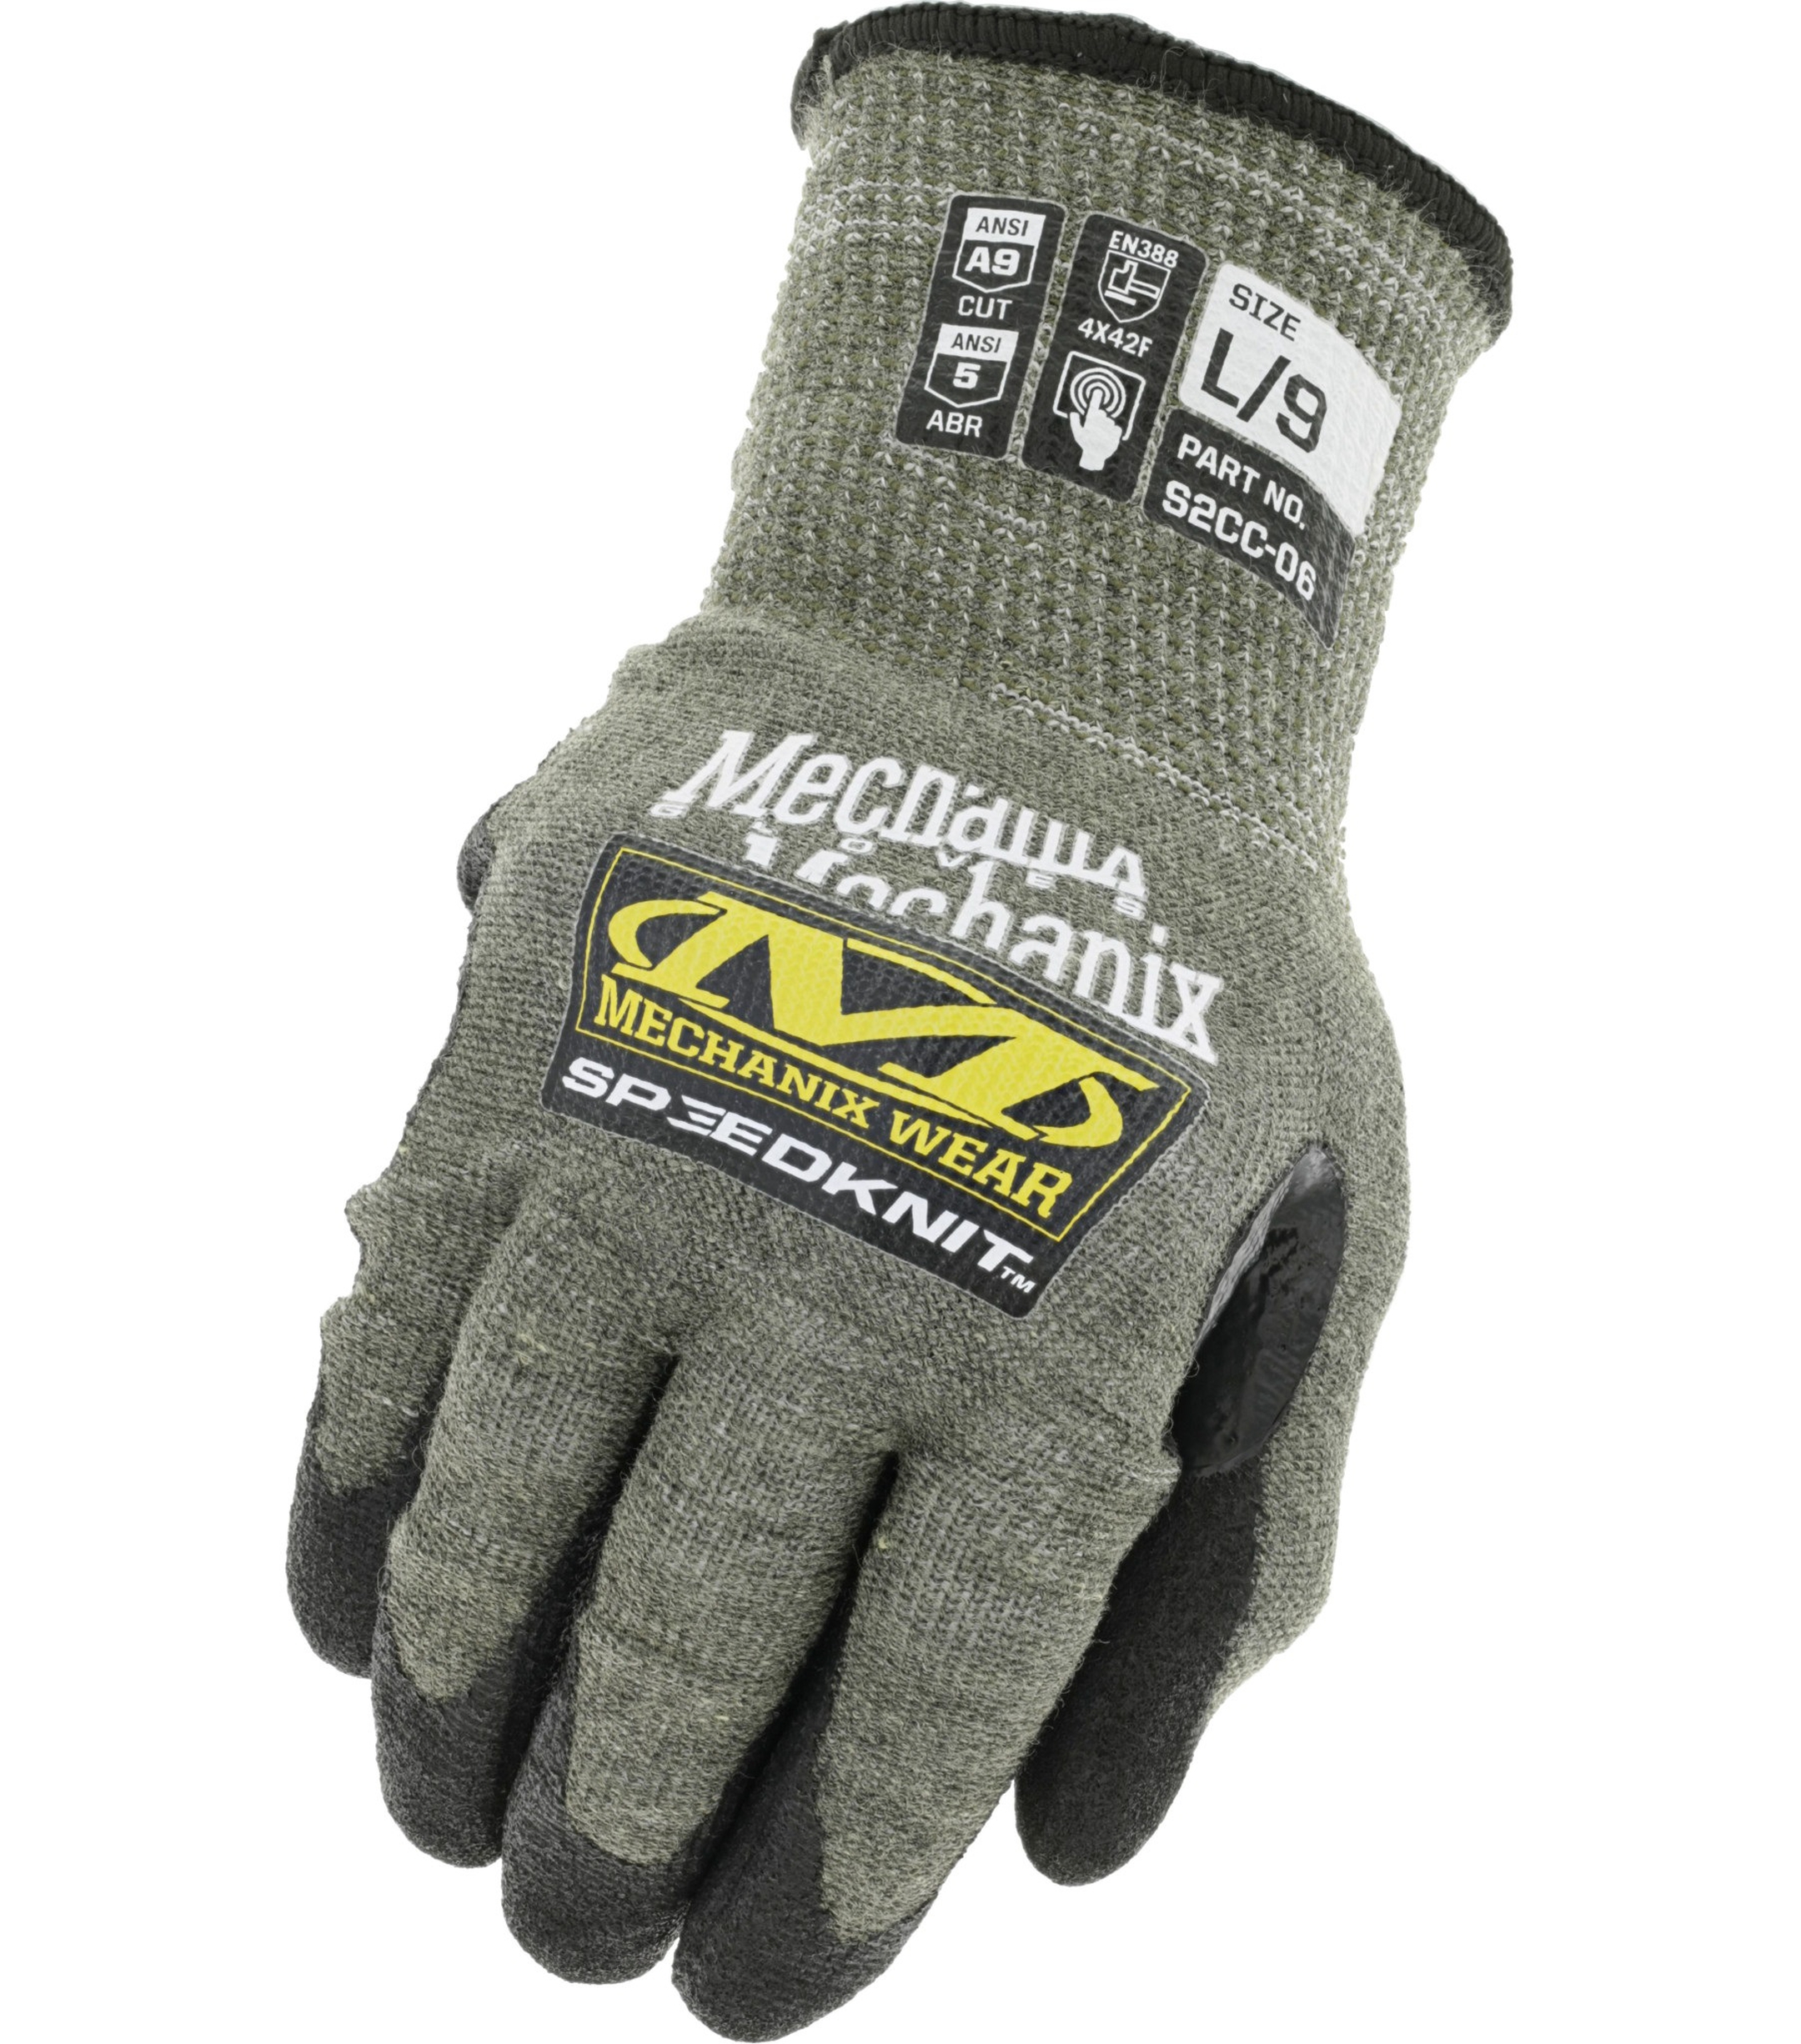 Cut Resistant Gloves -Food Grade, Level 5 Protection - Used by